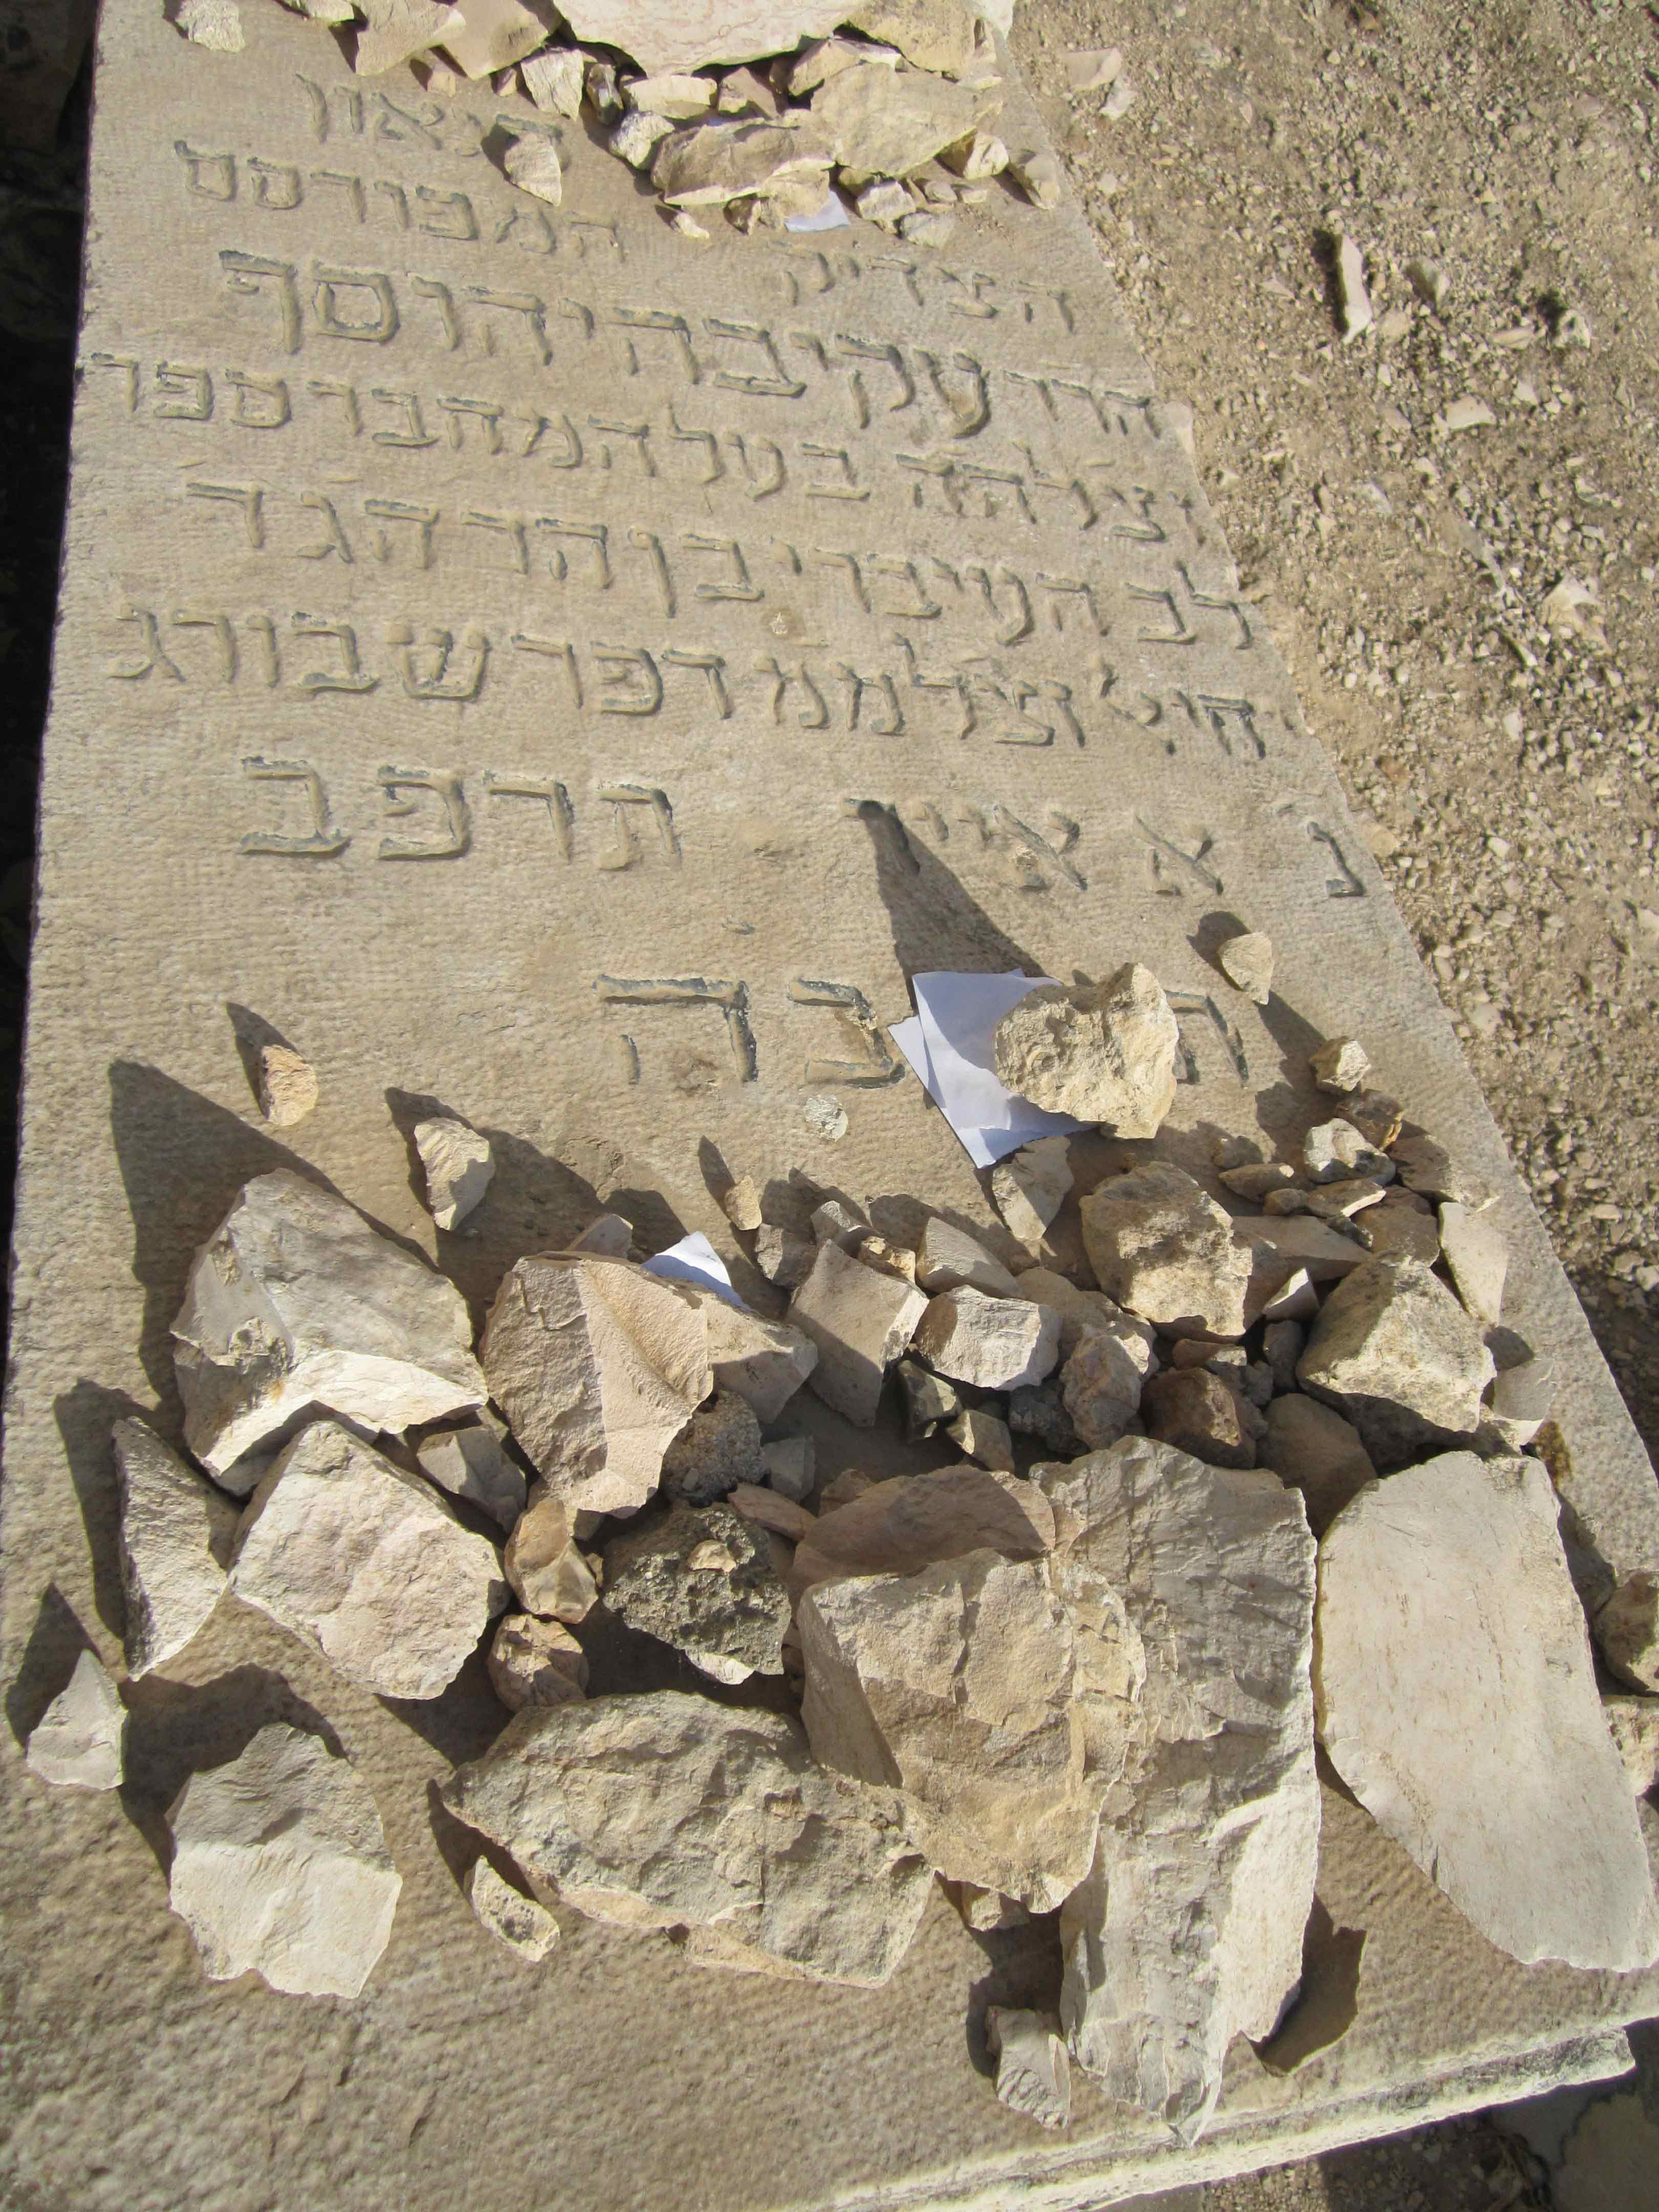 This gravestone from the Mount of Olives tells us that "Rabbi Akiva Yehosef" of Pressburg died on 1 Iyar 5682 (1922)